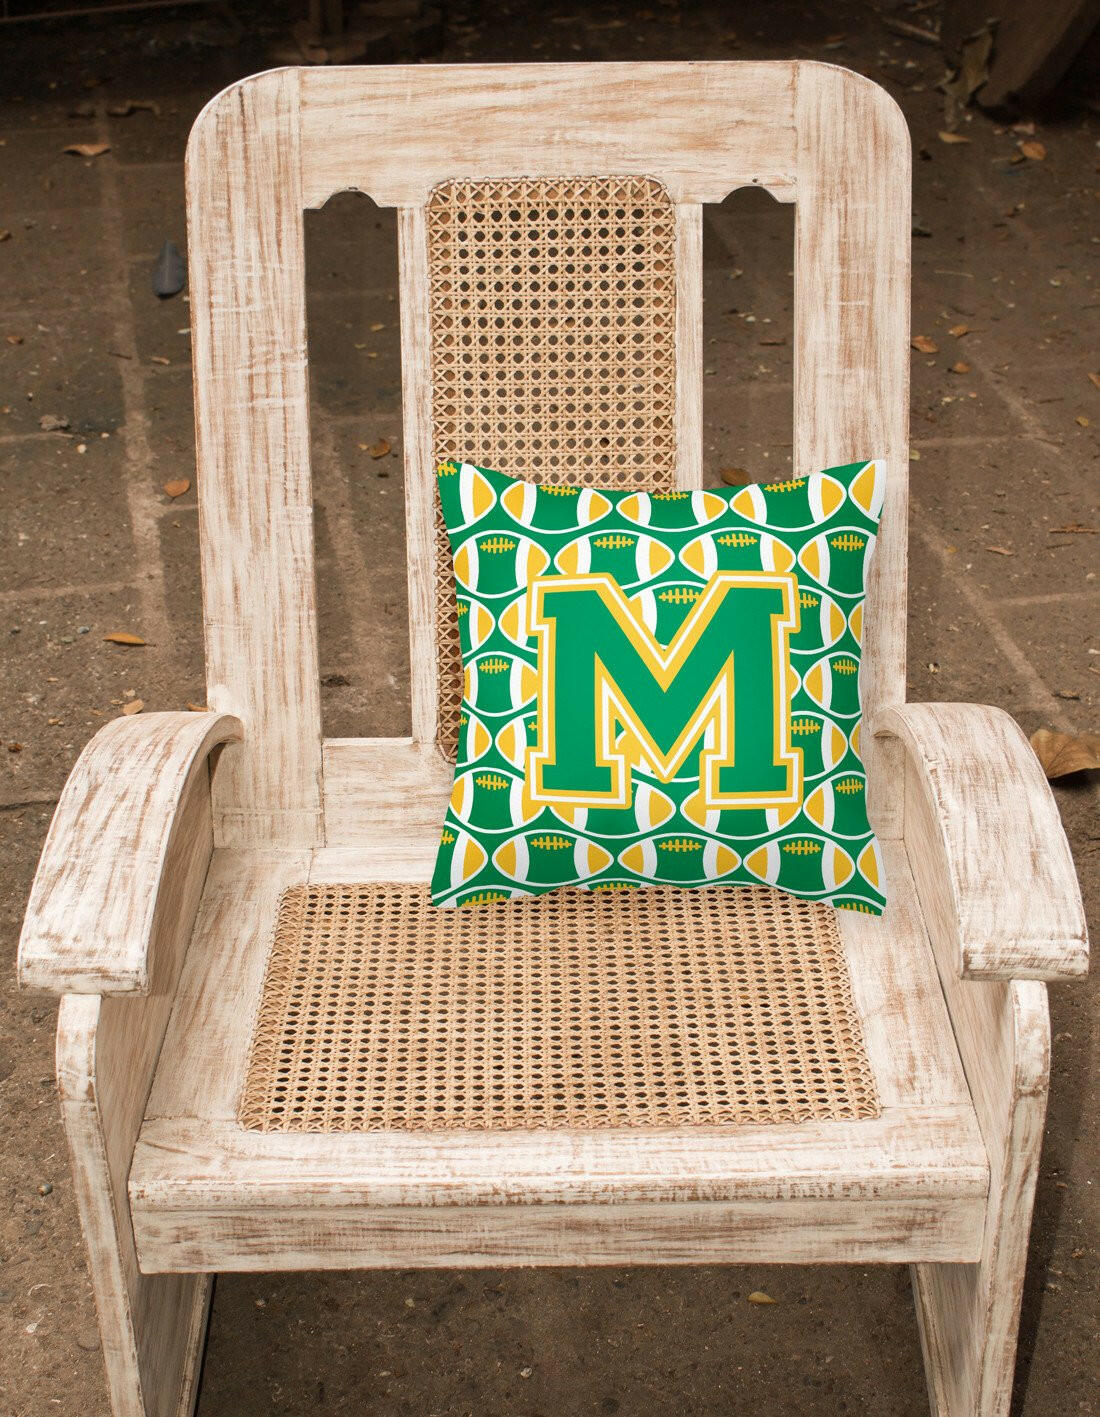 Letter M Football Green and Gold Fabric Decorative Pillow CJ1069-MPW1414 by Caroline's Treasures